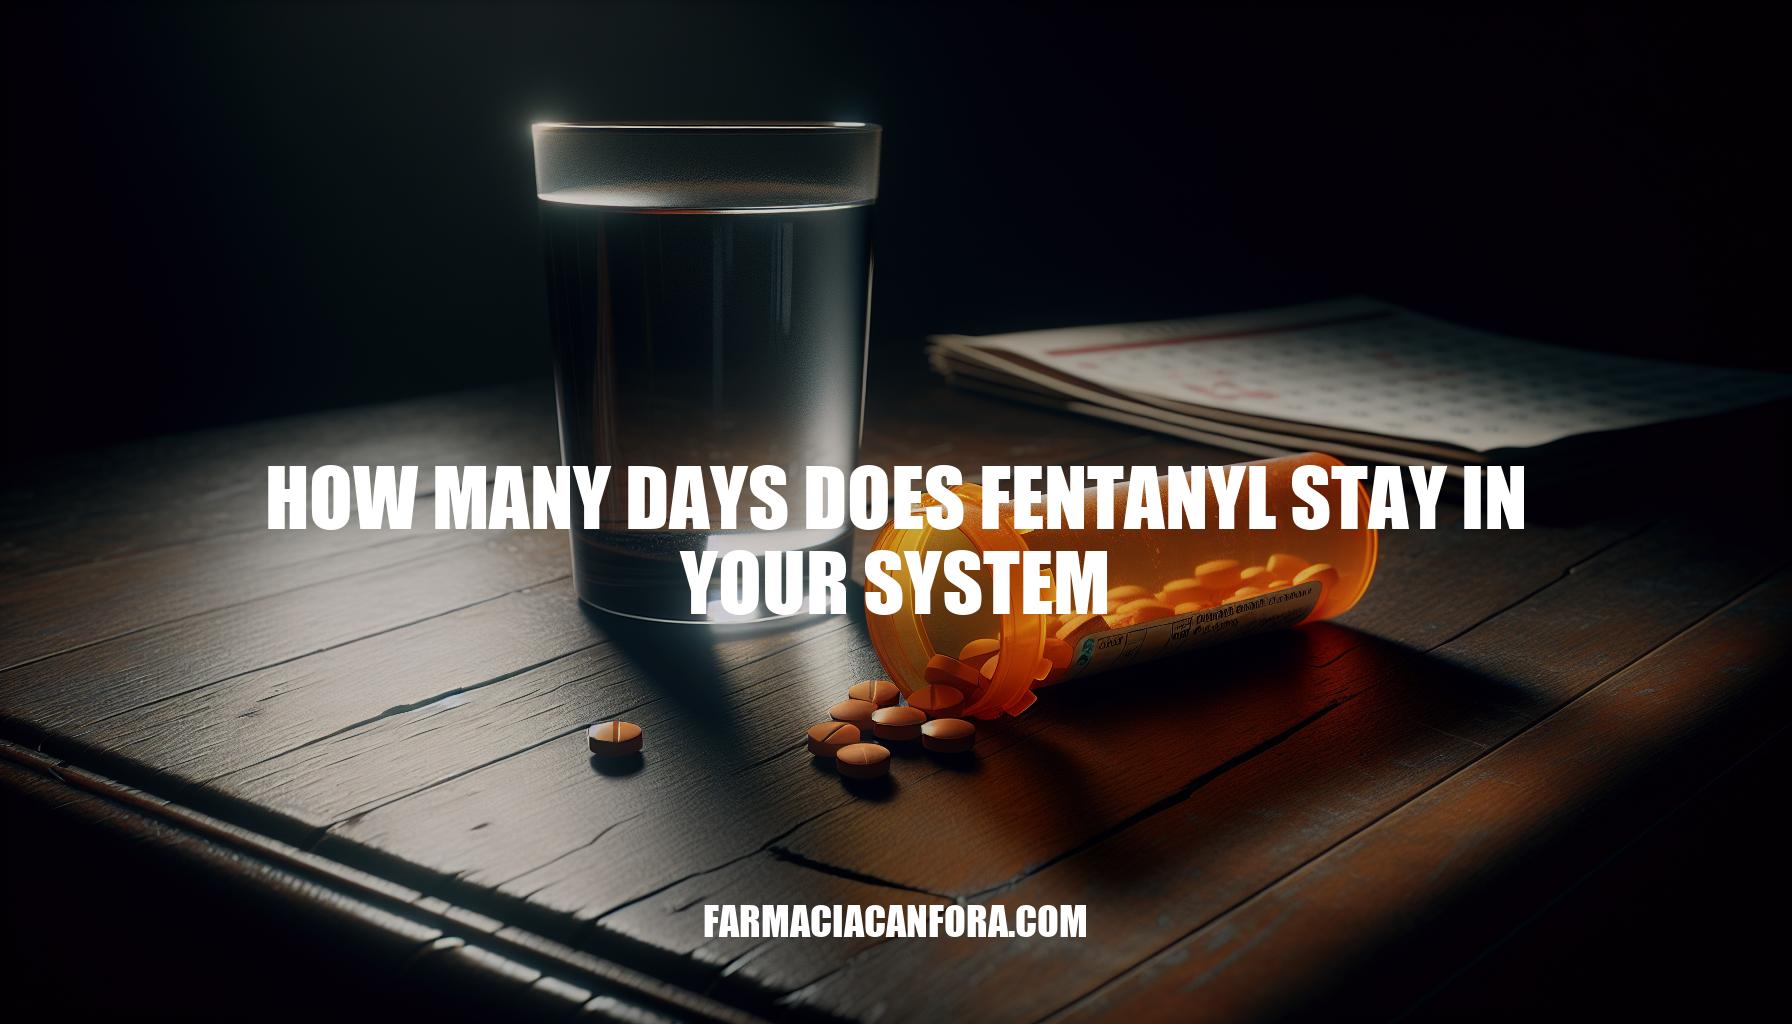 How Many Days Does Fentanyl Stay in Your System